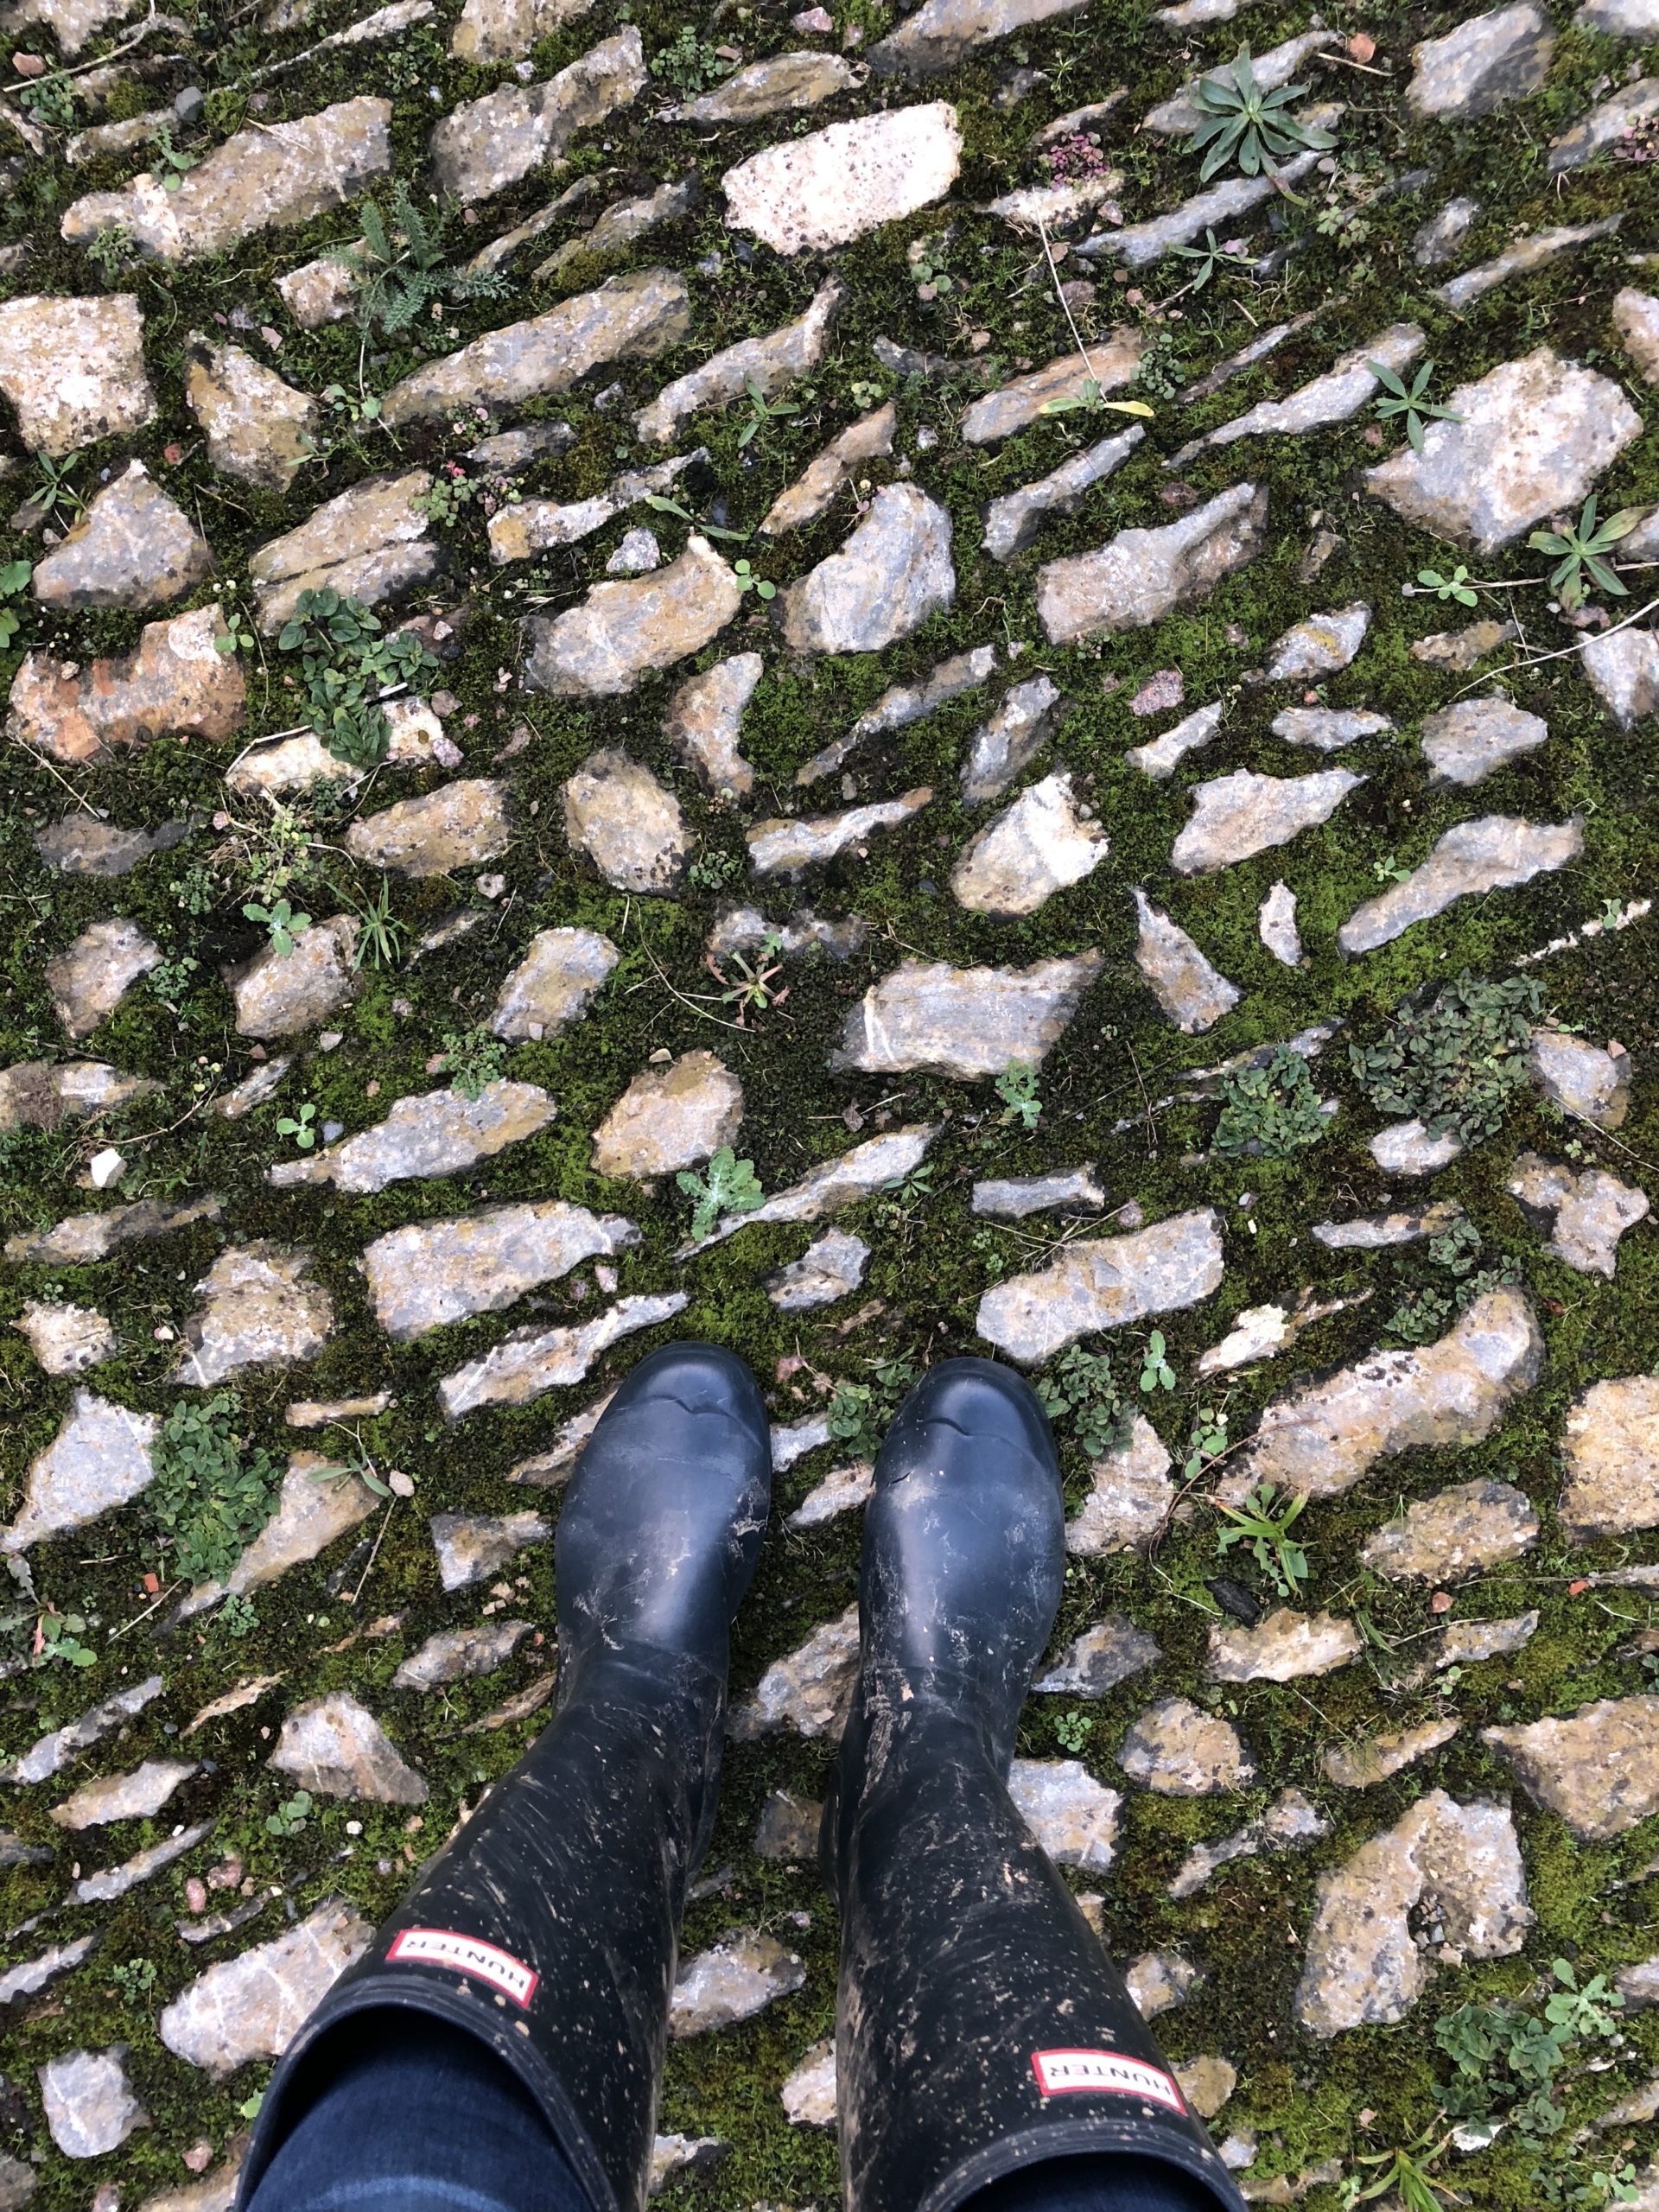 5 Reasons I Love My Hunter Rain Boots -wellies (And the 3rd Giveaway)